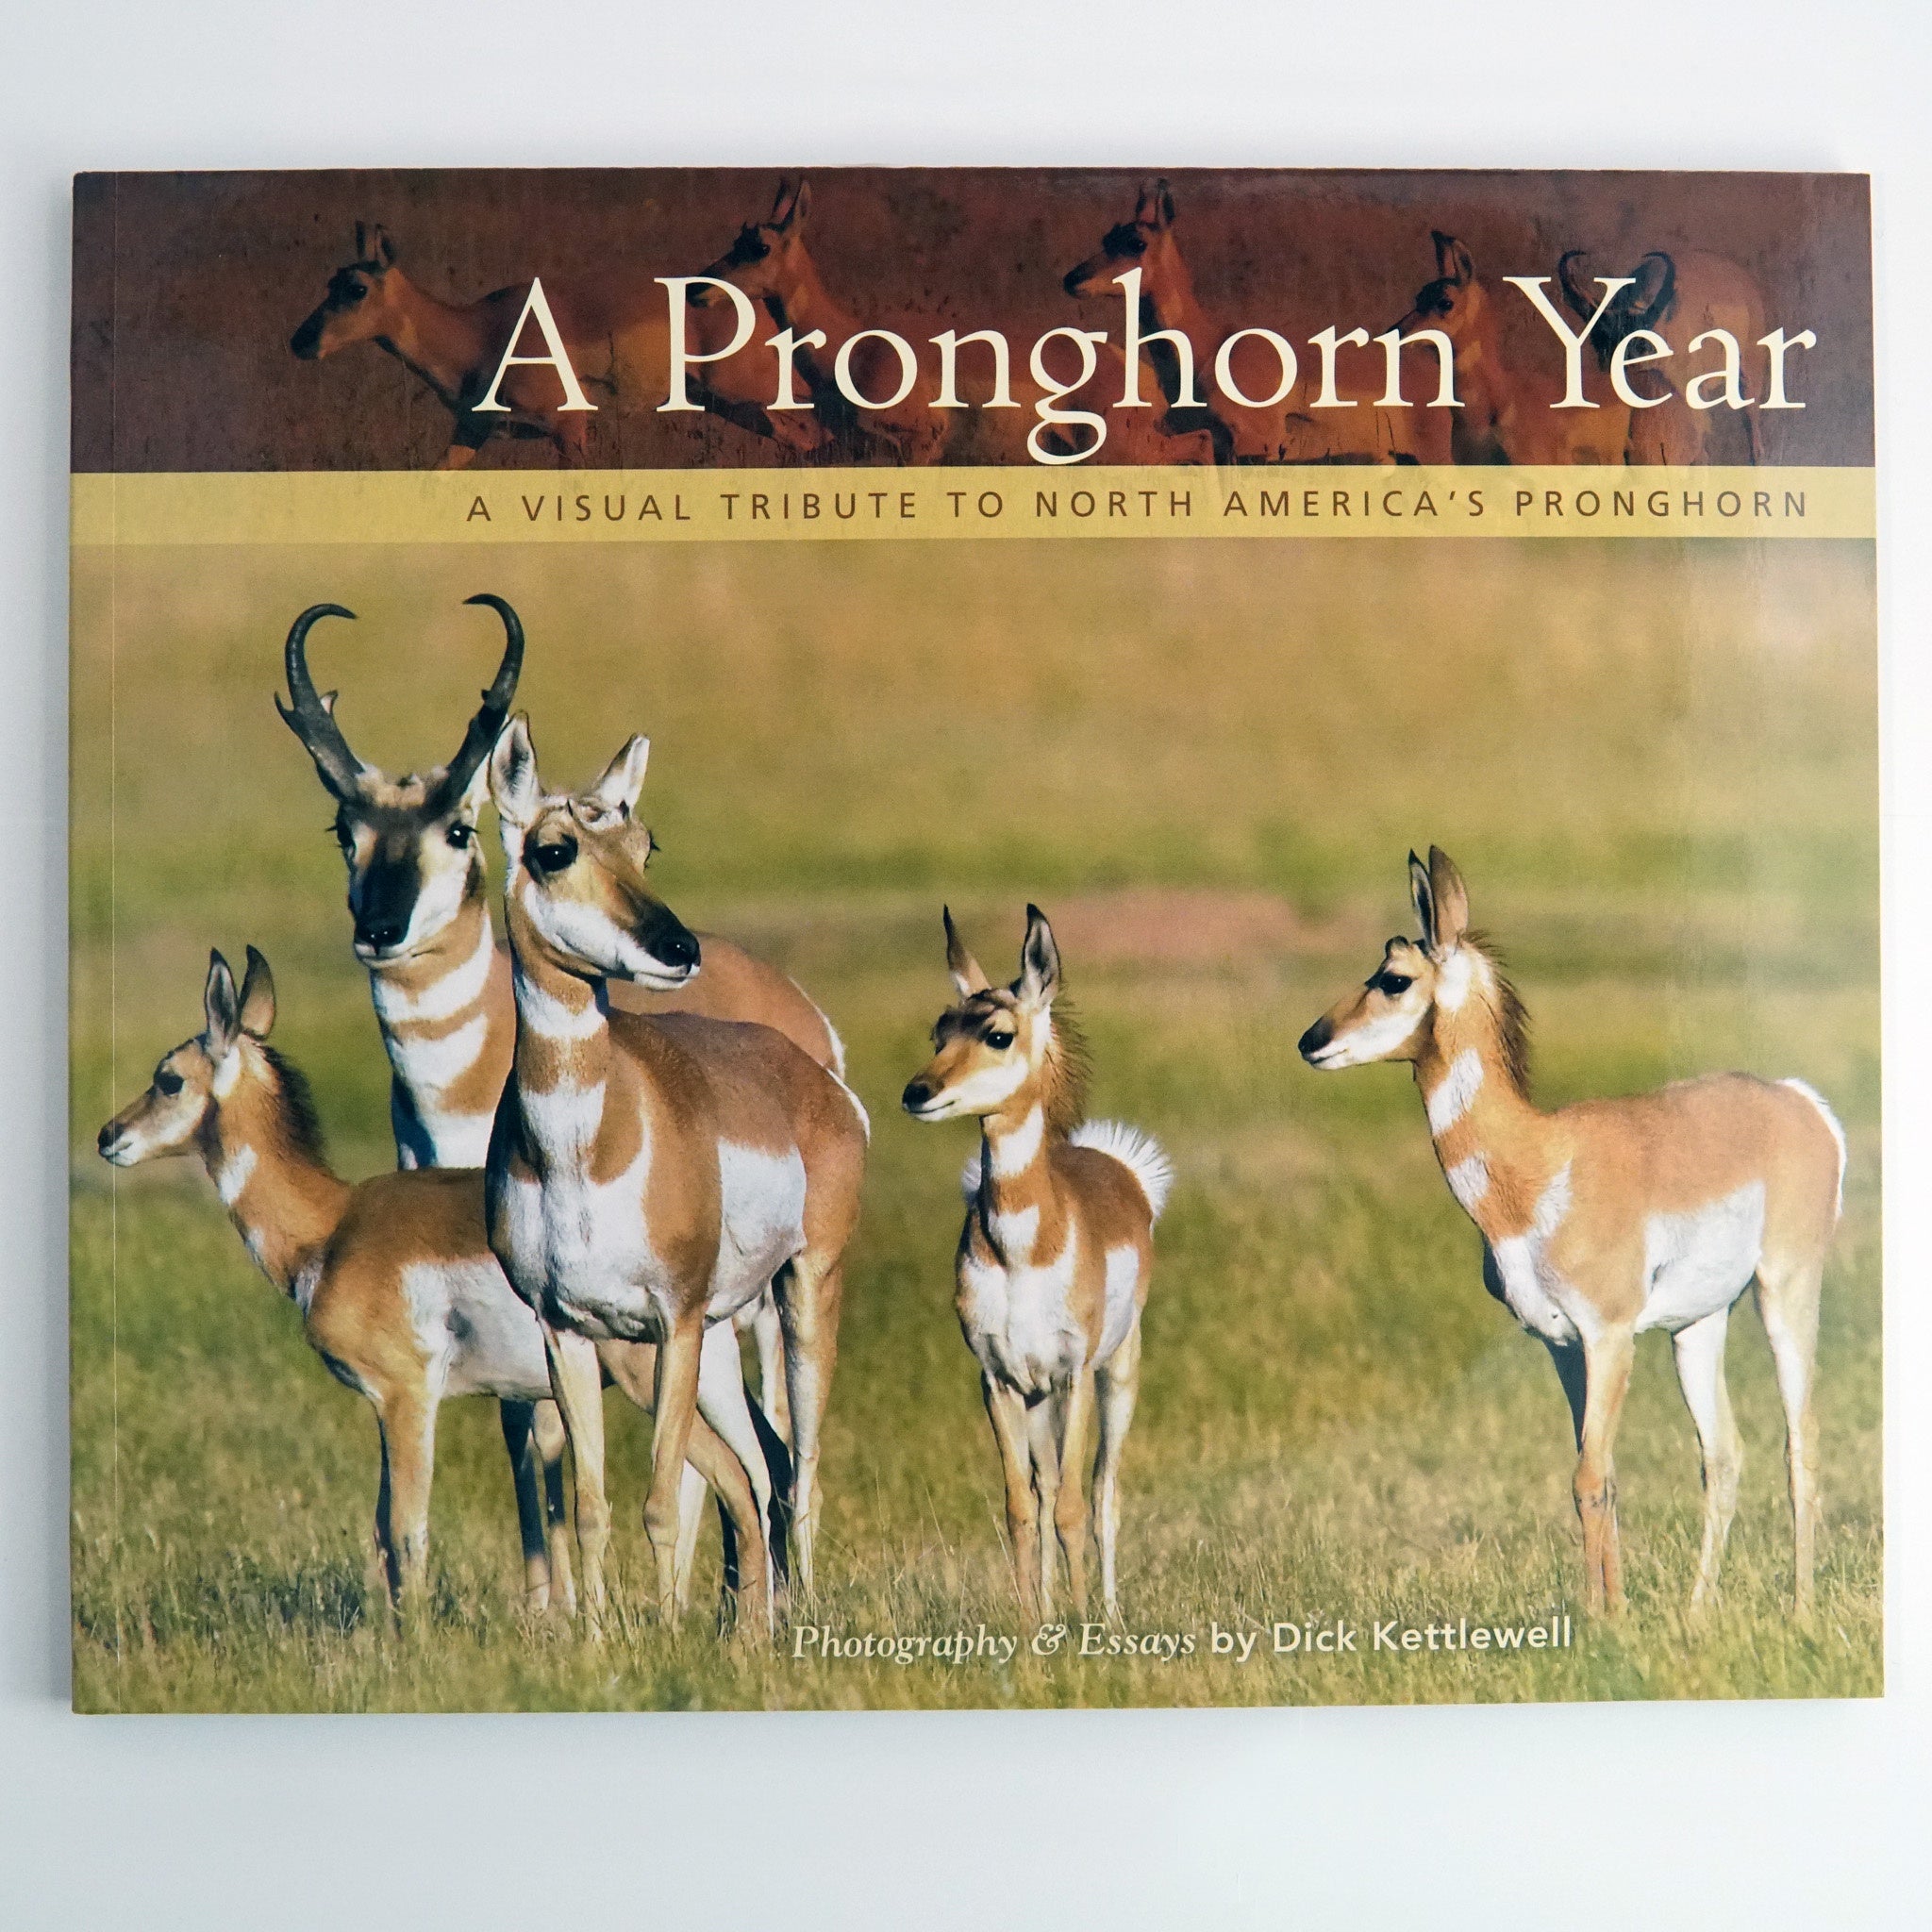 BK 11 A PRONGHORN YEAR: A VISUAL TRIBUTE TO NORTH AMERICA'S PRONGHORN BY DICK KETTLEWELL #21038642